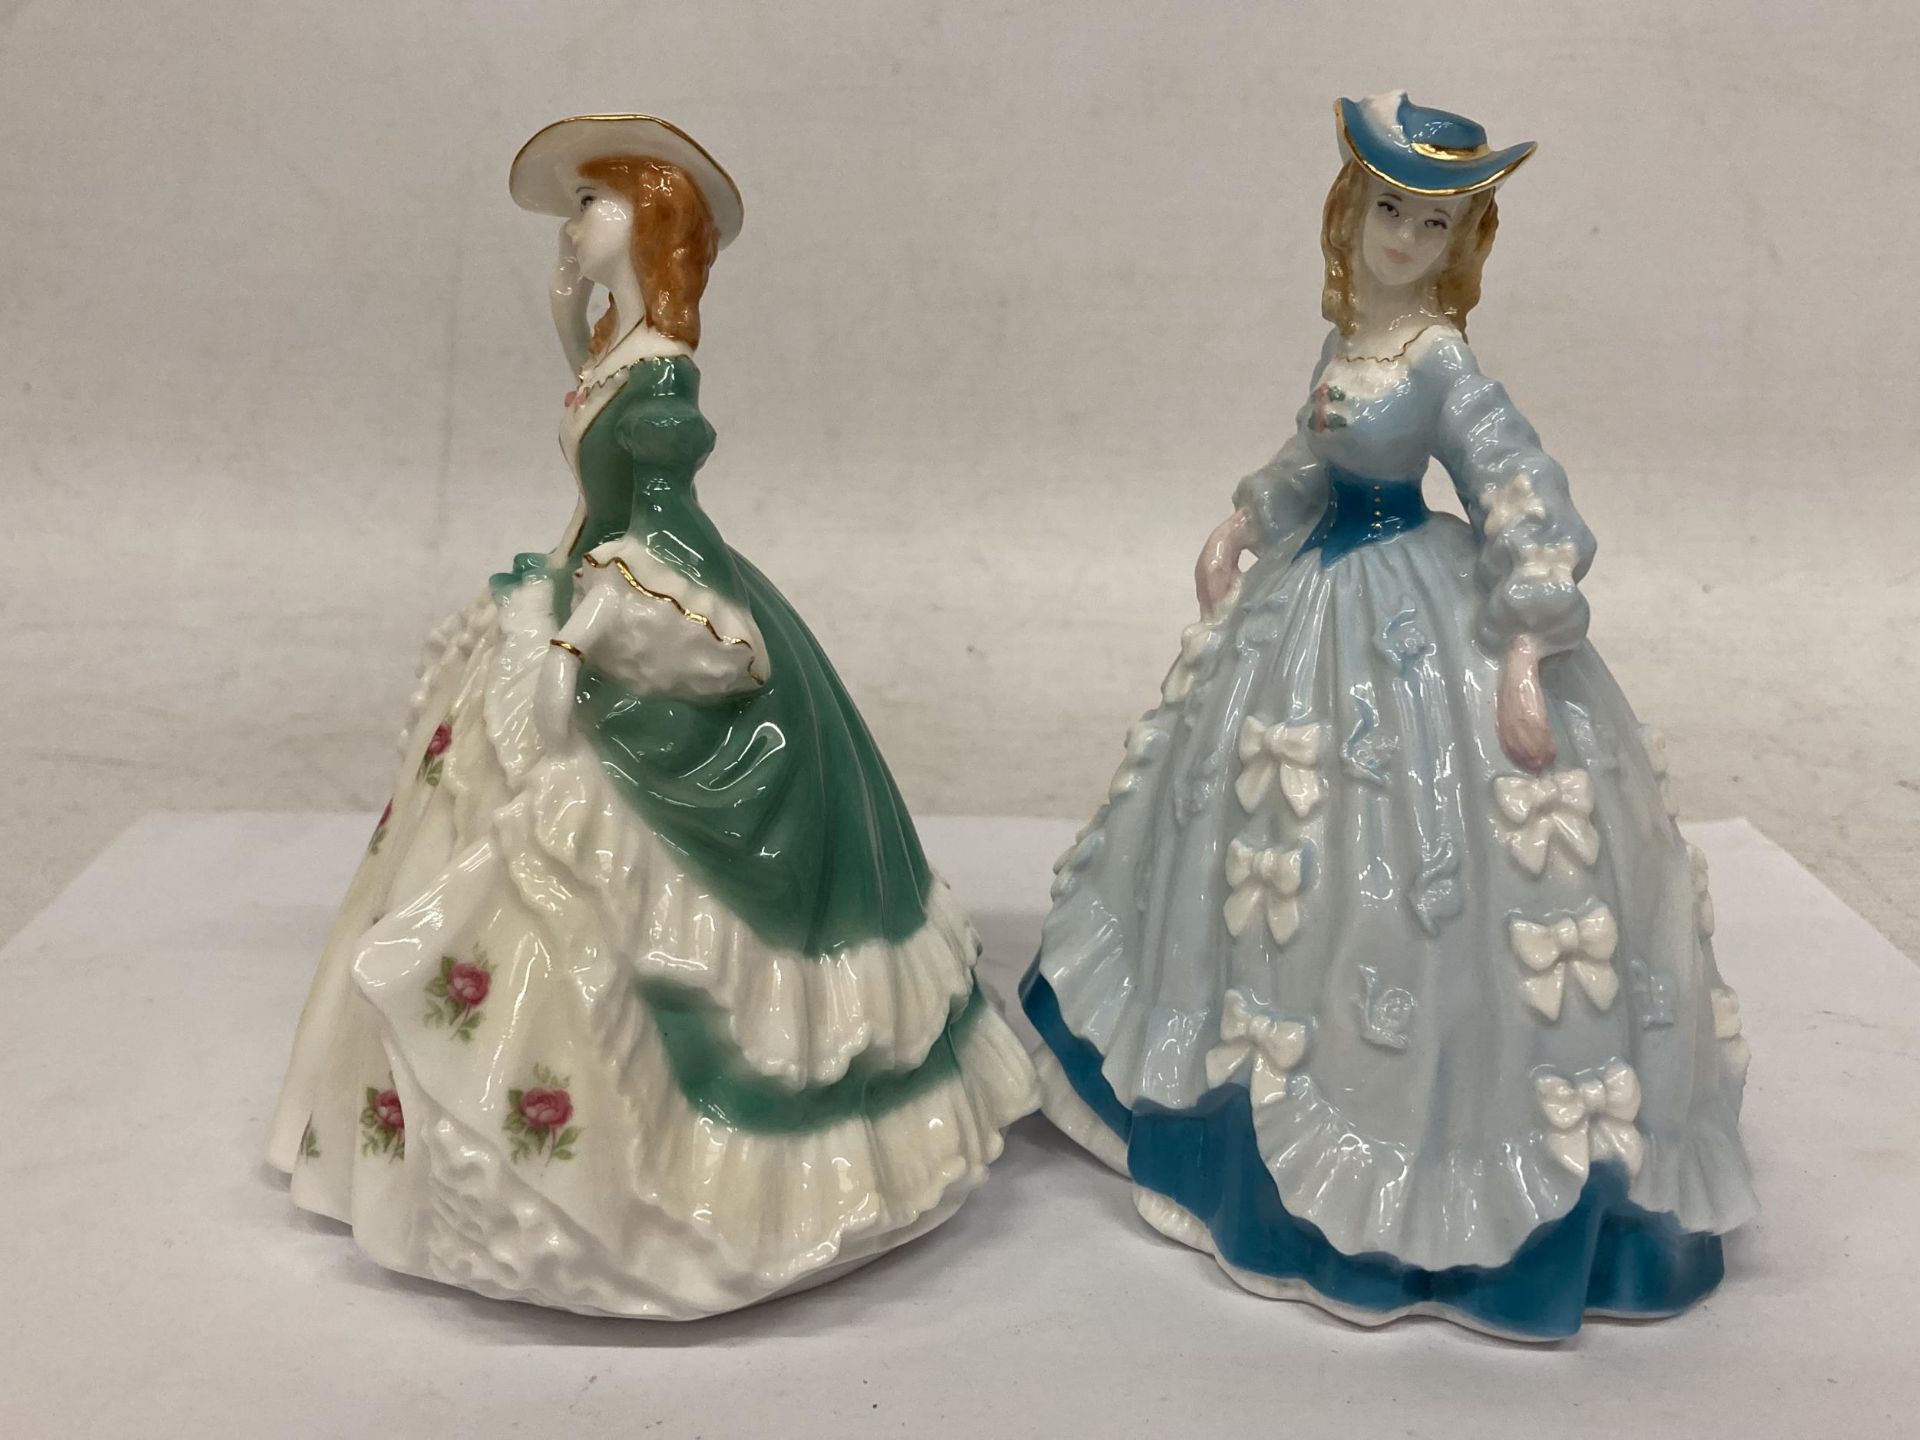 TWO ROYAL WORCESTER FIGURINES FROM THE FASIONABLE VICTORIANS COLLECTION "LADY SARAH" LIMITED EDITION - Image 3 of 4